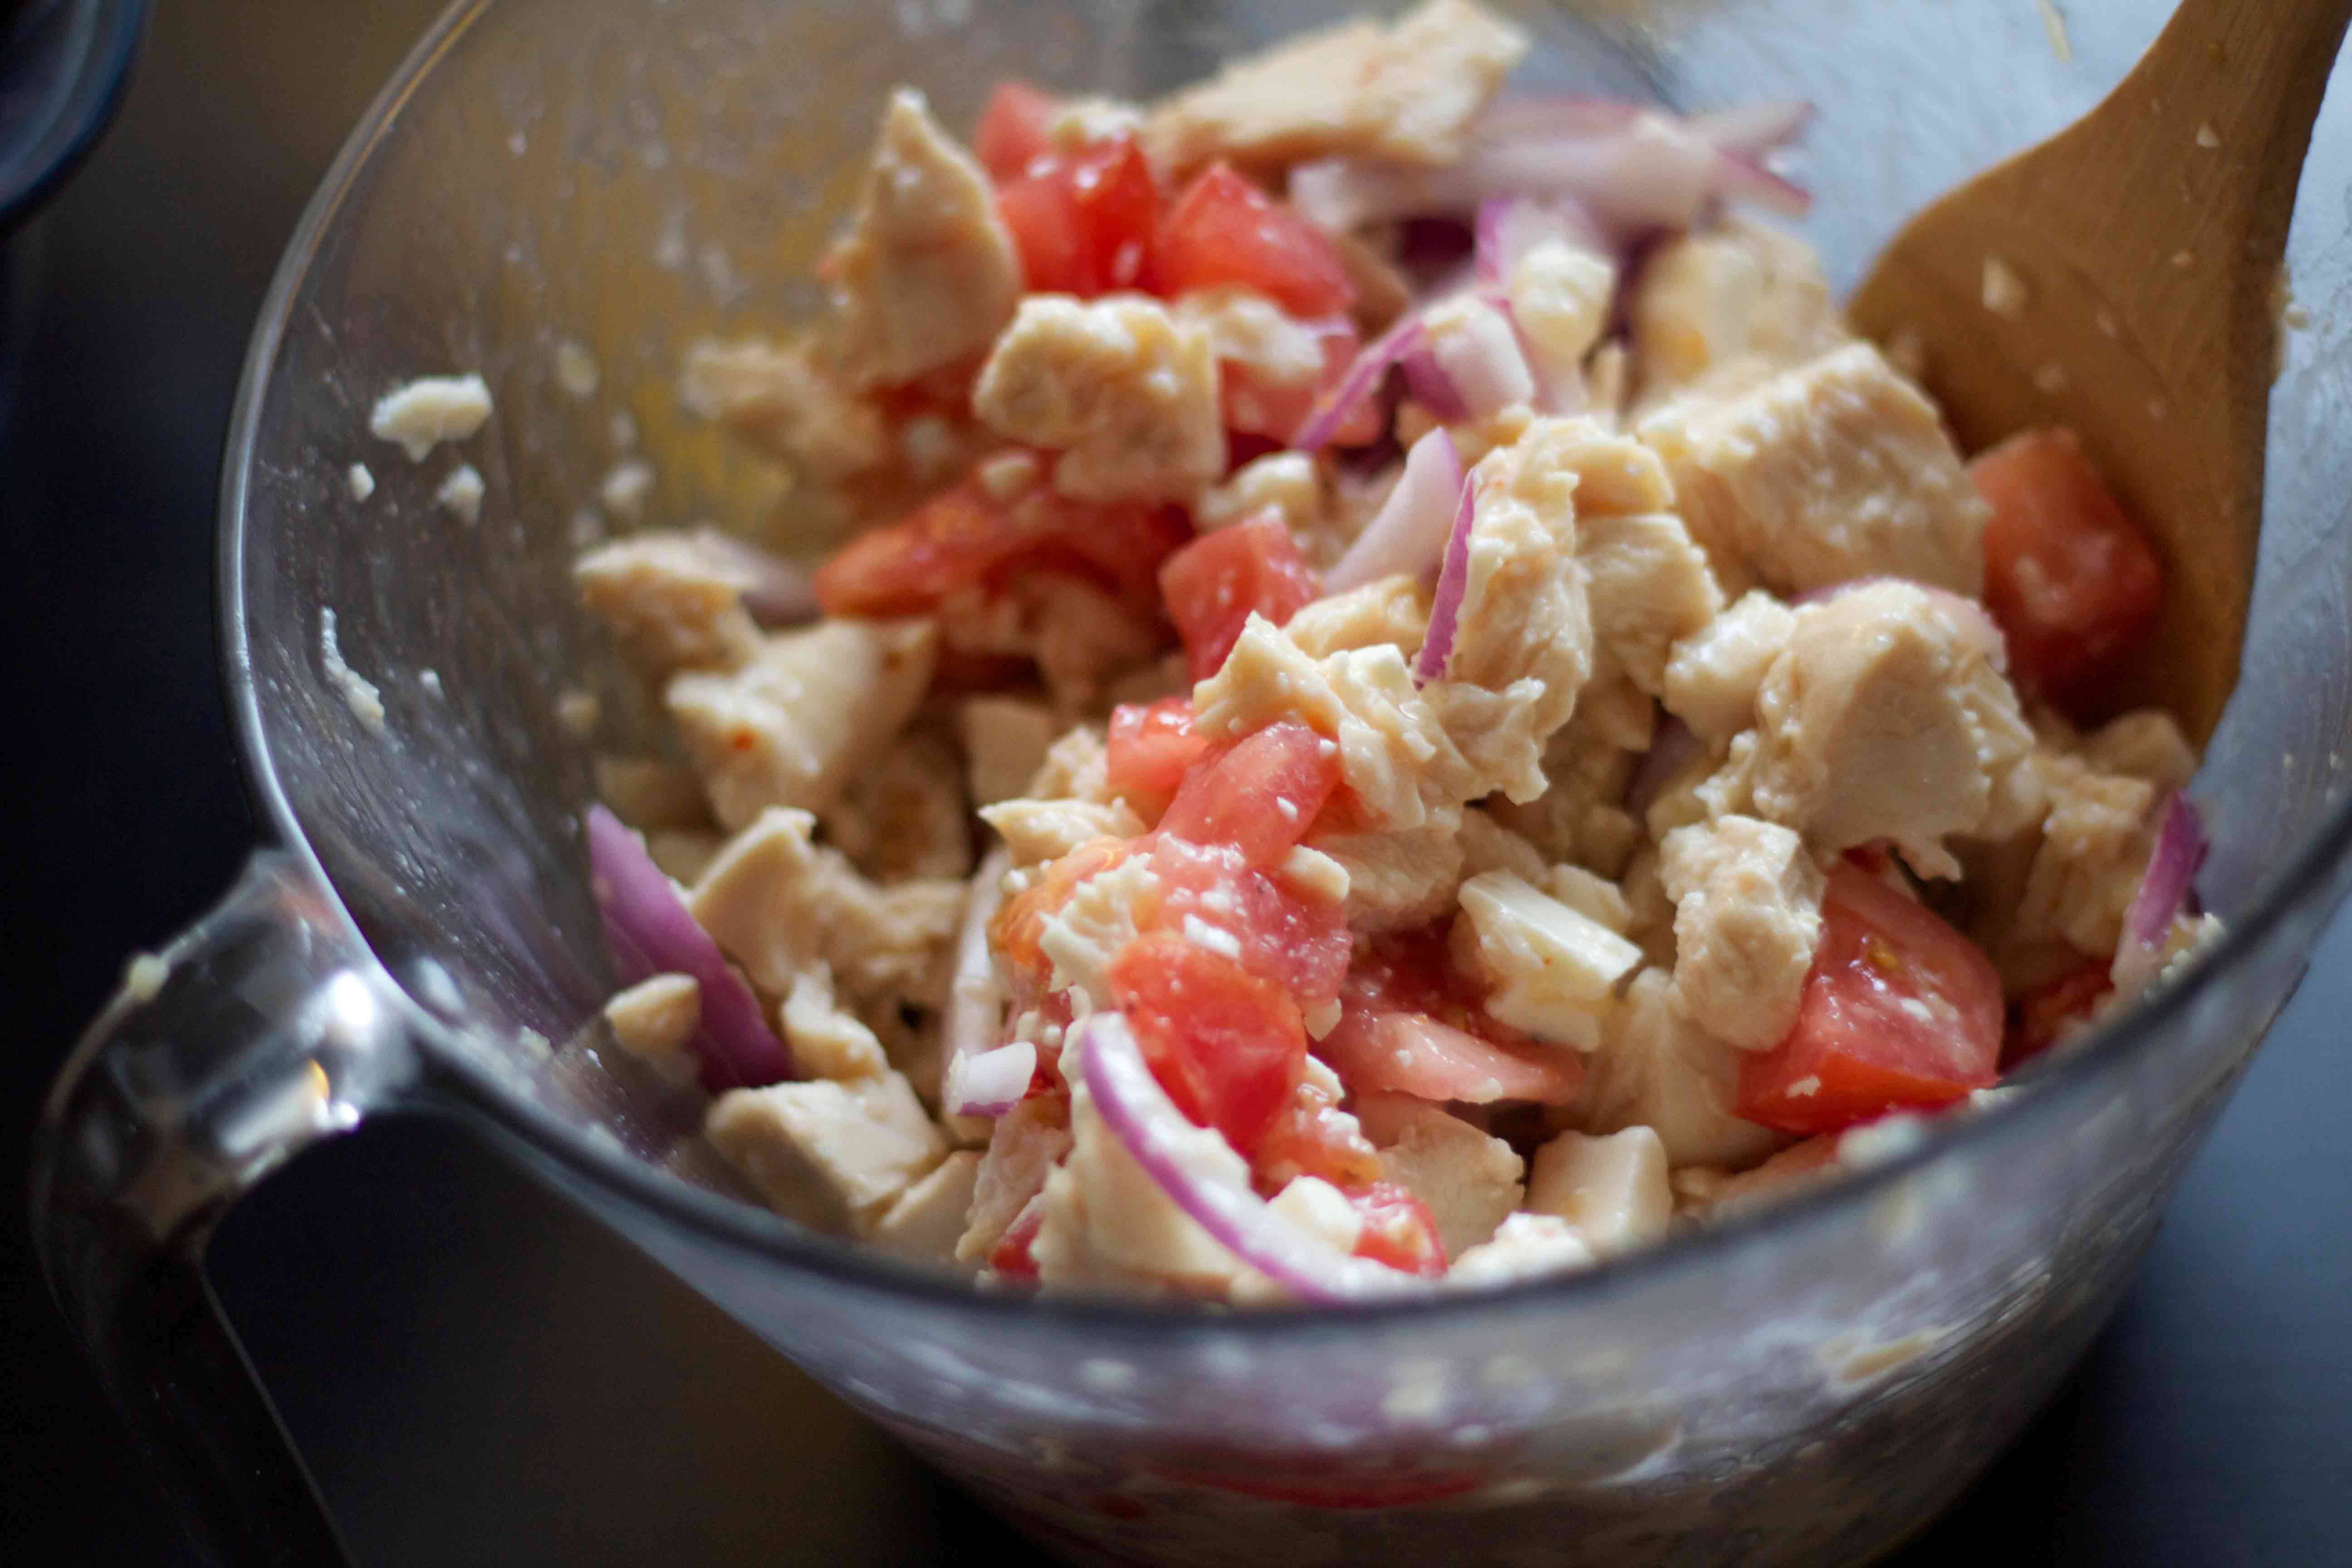 Greek Chicken Salad. Make ahead and enjoy for lunches! So much flavor and low-carb. Bariatric friendly.